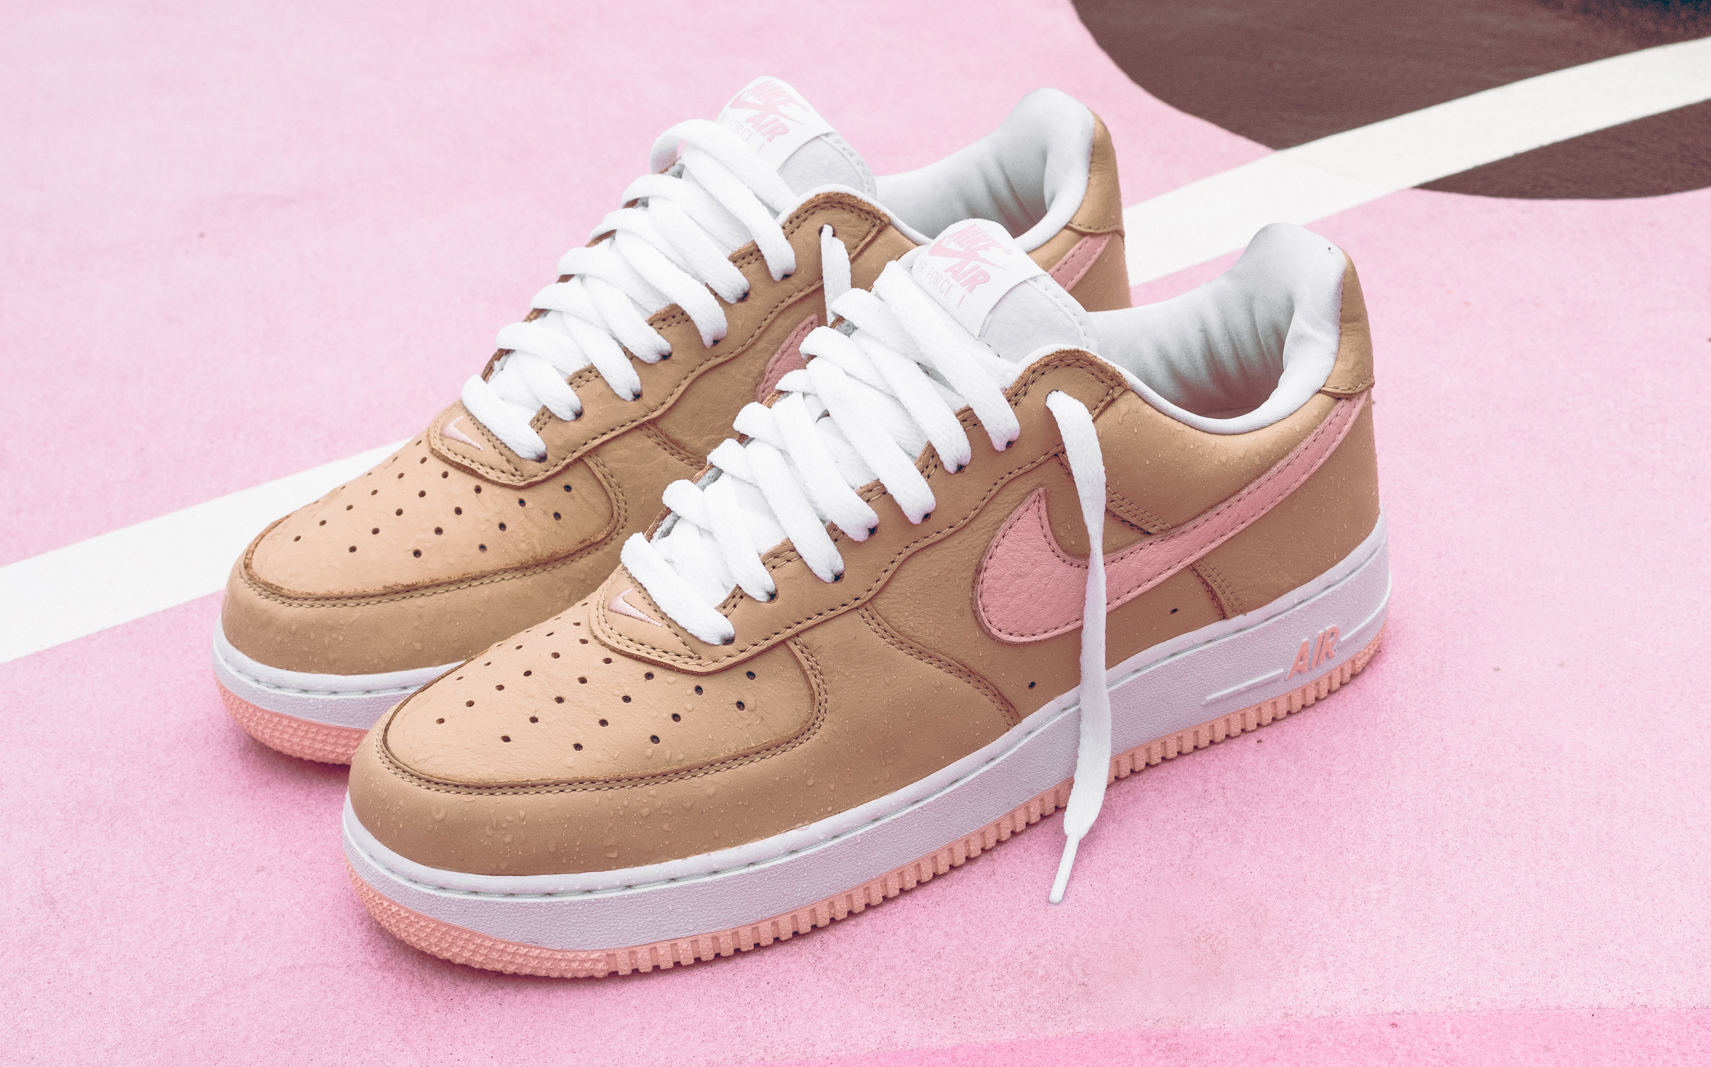 pink and brown air force ones